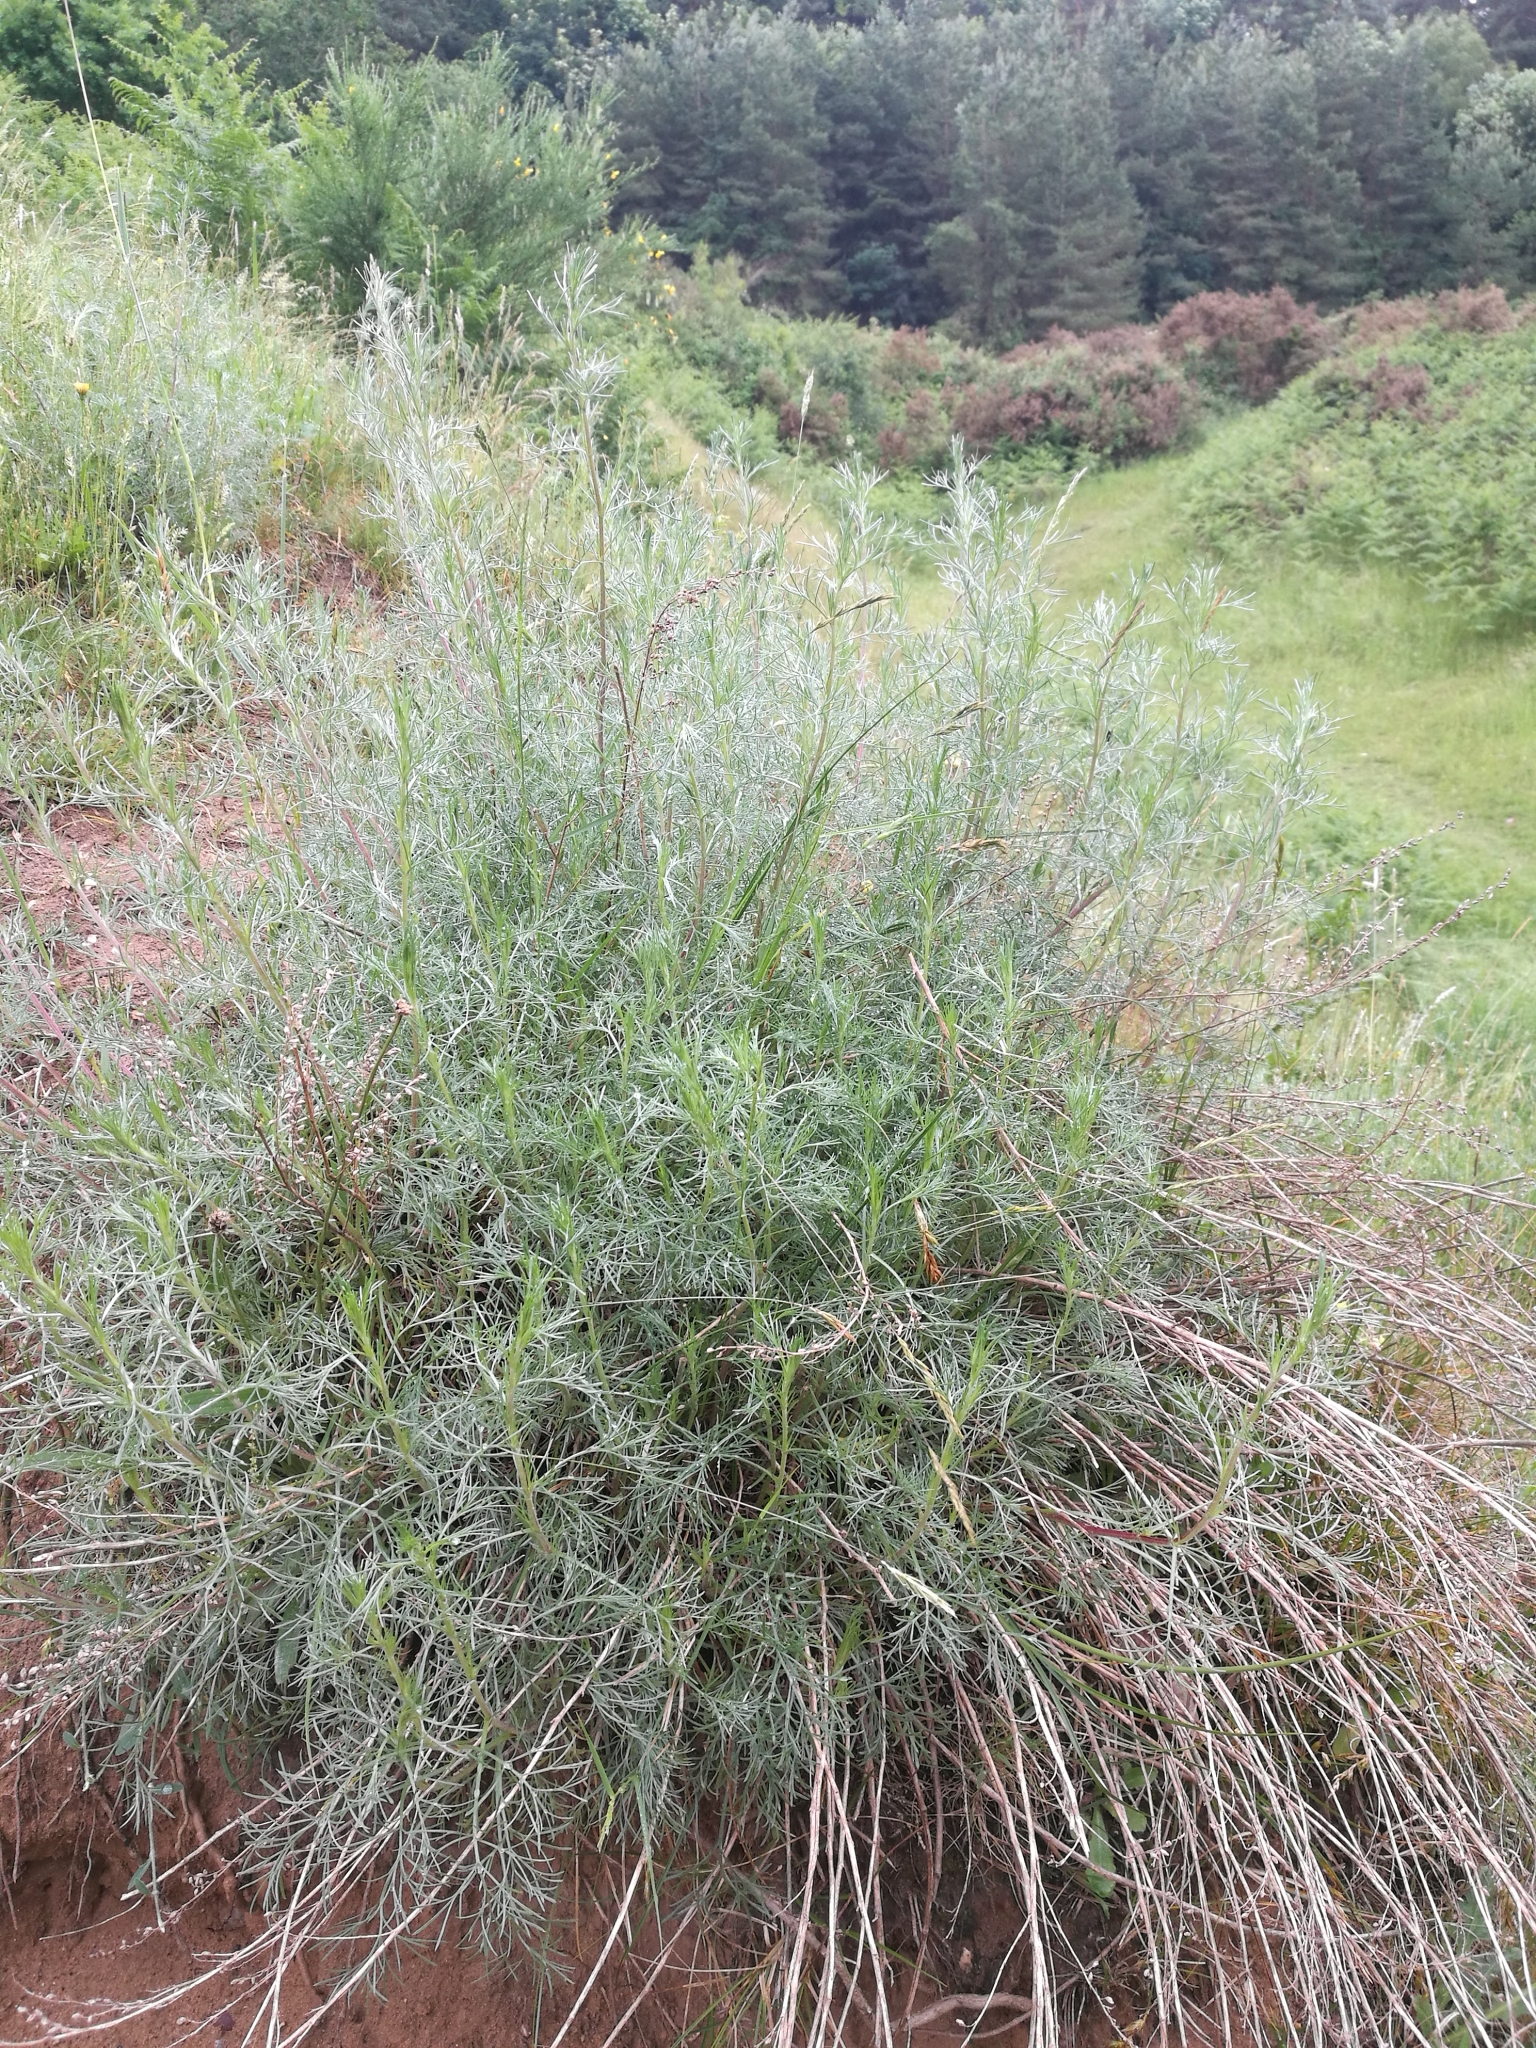 A photo from the FoTF Conservation Event - June 2021 - Brash Clearance at Mildenhall Mugwort Pit : A shot of a plant at Mildenhall Mugwort Pit